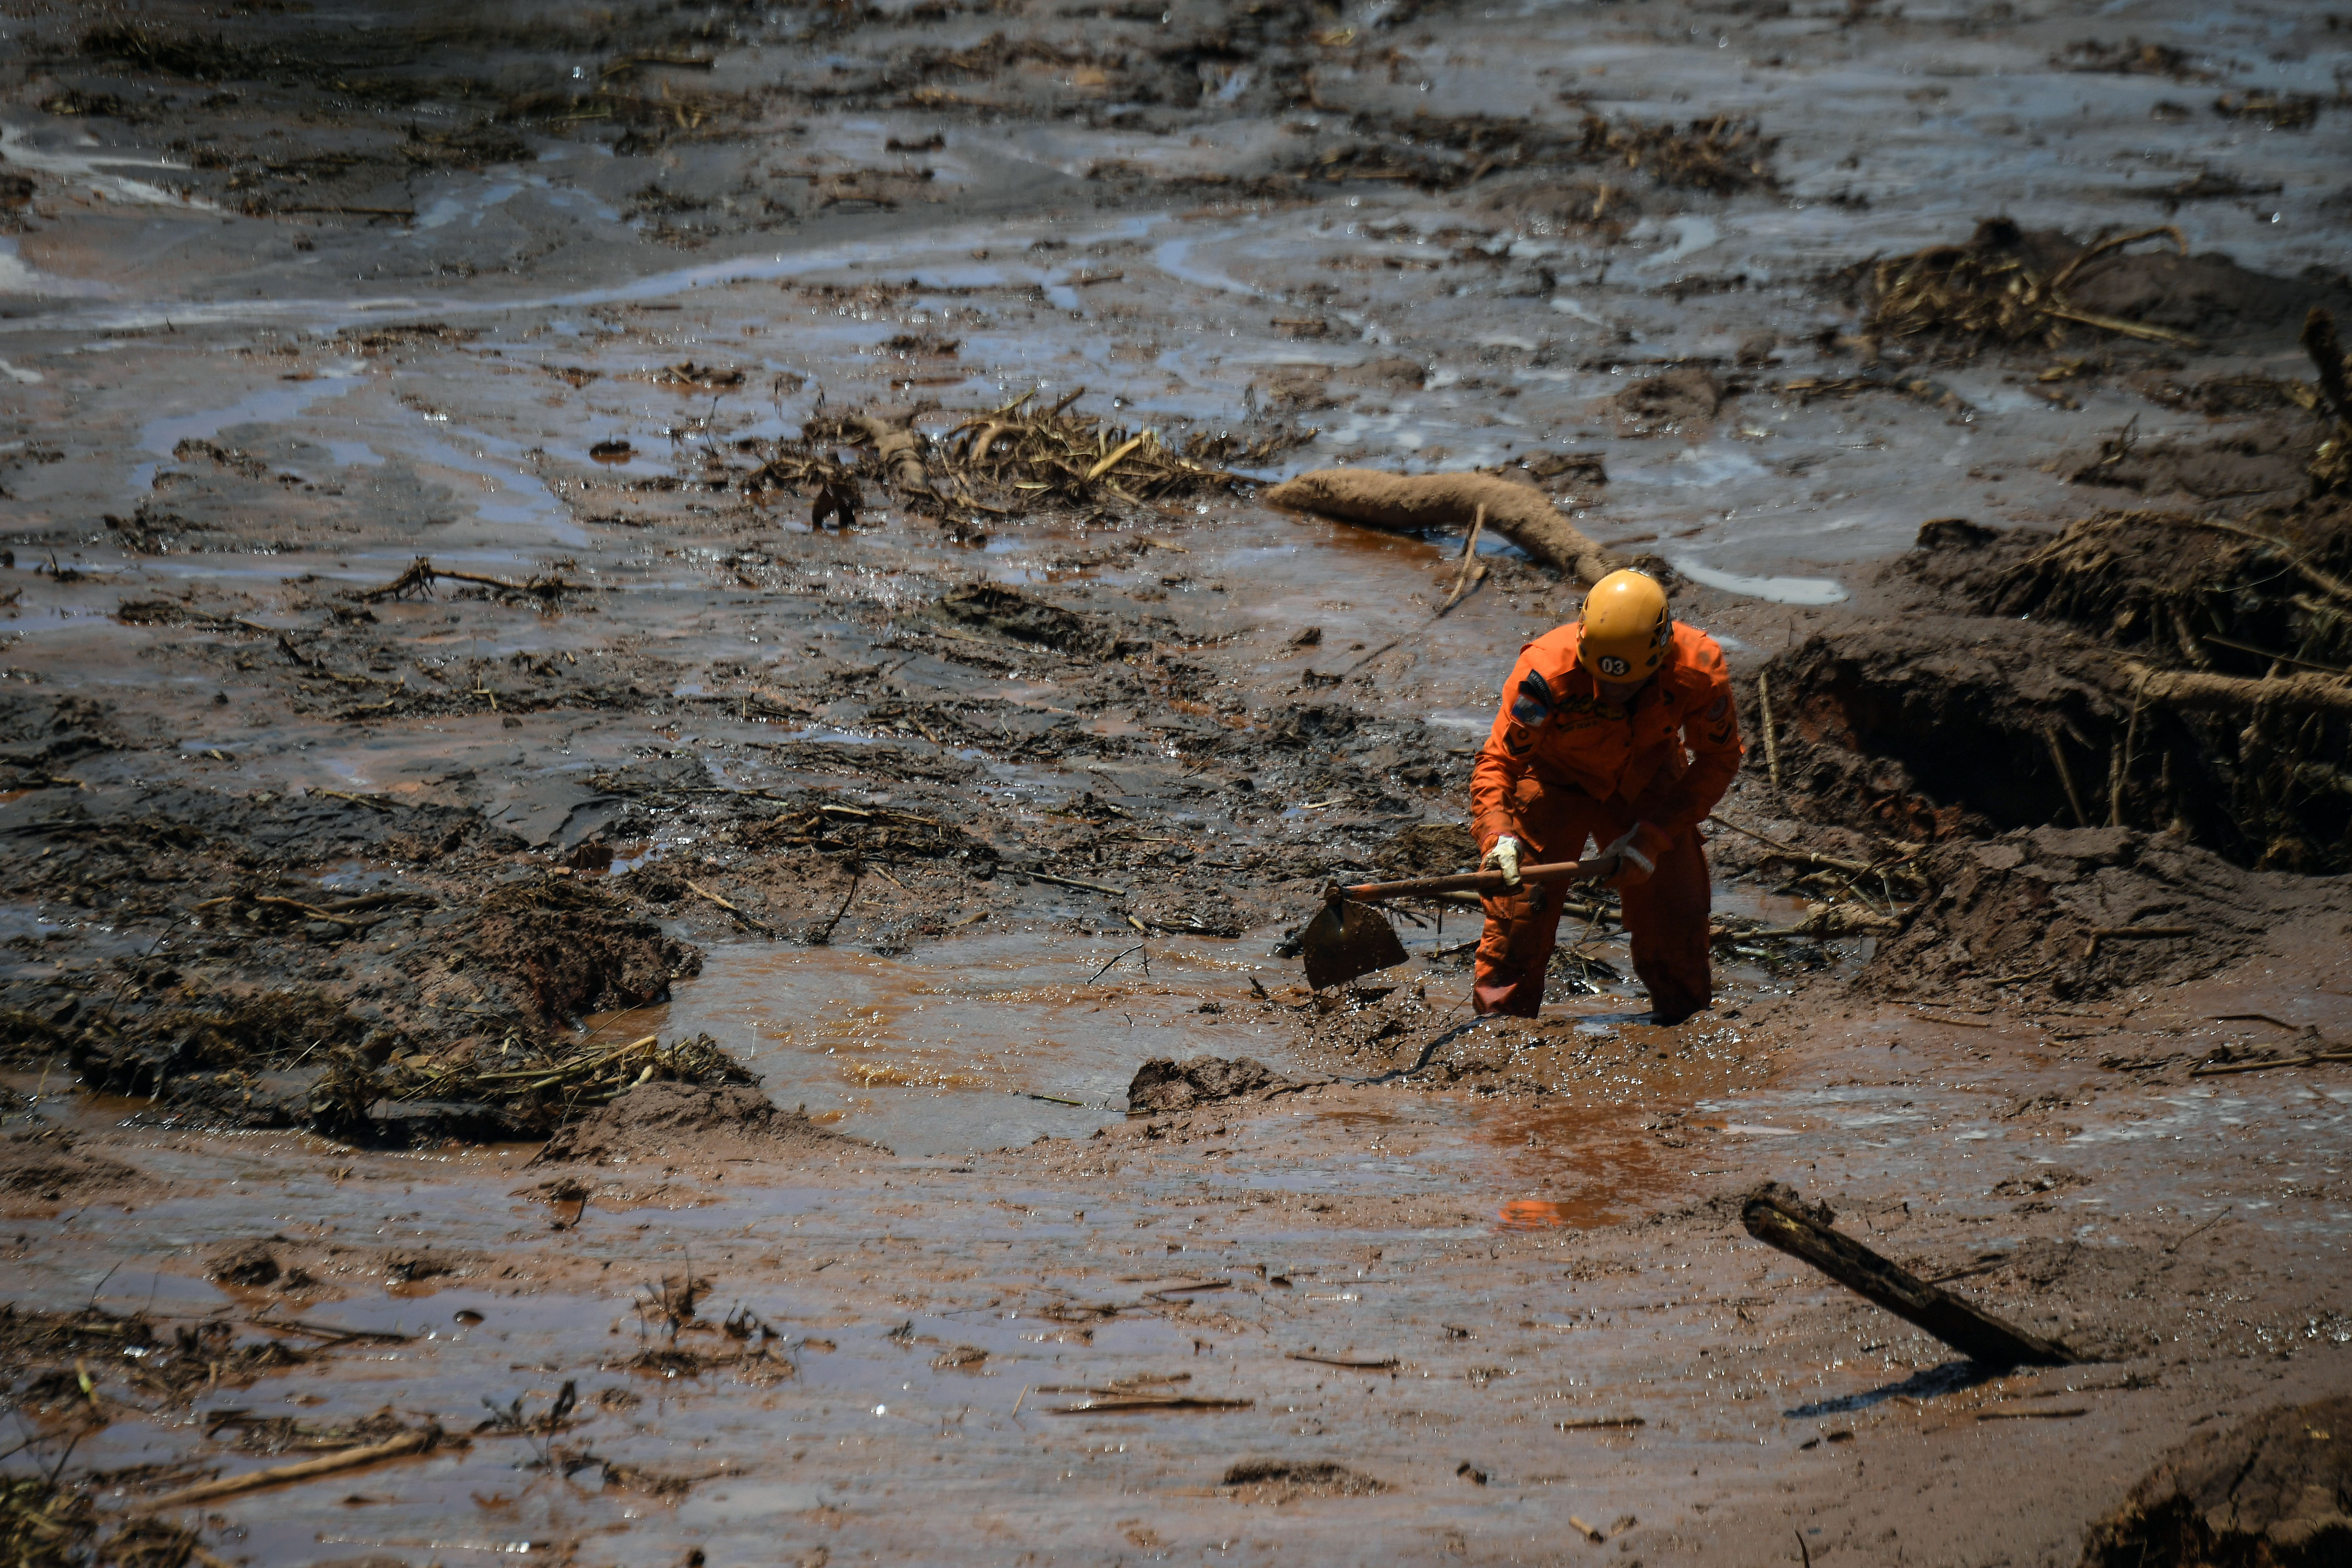 A rescuer works in the search for victims, four days after the collapse of a dam at an iron-ore mine belonging to Brazil's giant mining company Vale near the town of Brumadinho, state of Minas Gerias, southeastern Brazil, on January 28, 2019. - The search for survivors intensified on Monday, on its fourth day, with the support of an Israeli contingent, after communities were devastated by a dam collapse that killed at least 60 people at a Brazilian mining complex -- with hopes fading for 292 still missing. A barrier at the site burst on Friday, spewing millions of tons of treacherous sludge and engulfing buildings, vehicles and roads. (Photo by Mauro Pimentel / AFP) (Photo credit should read MAURO PIMENTEL/AFP/Getty Images)